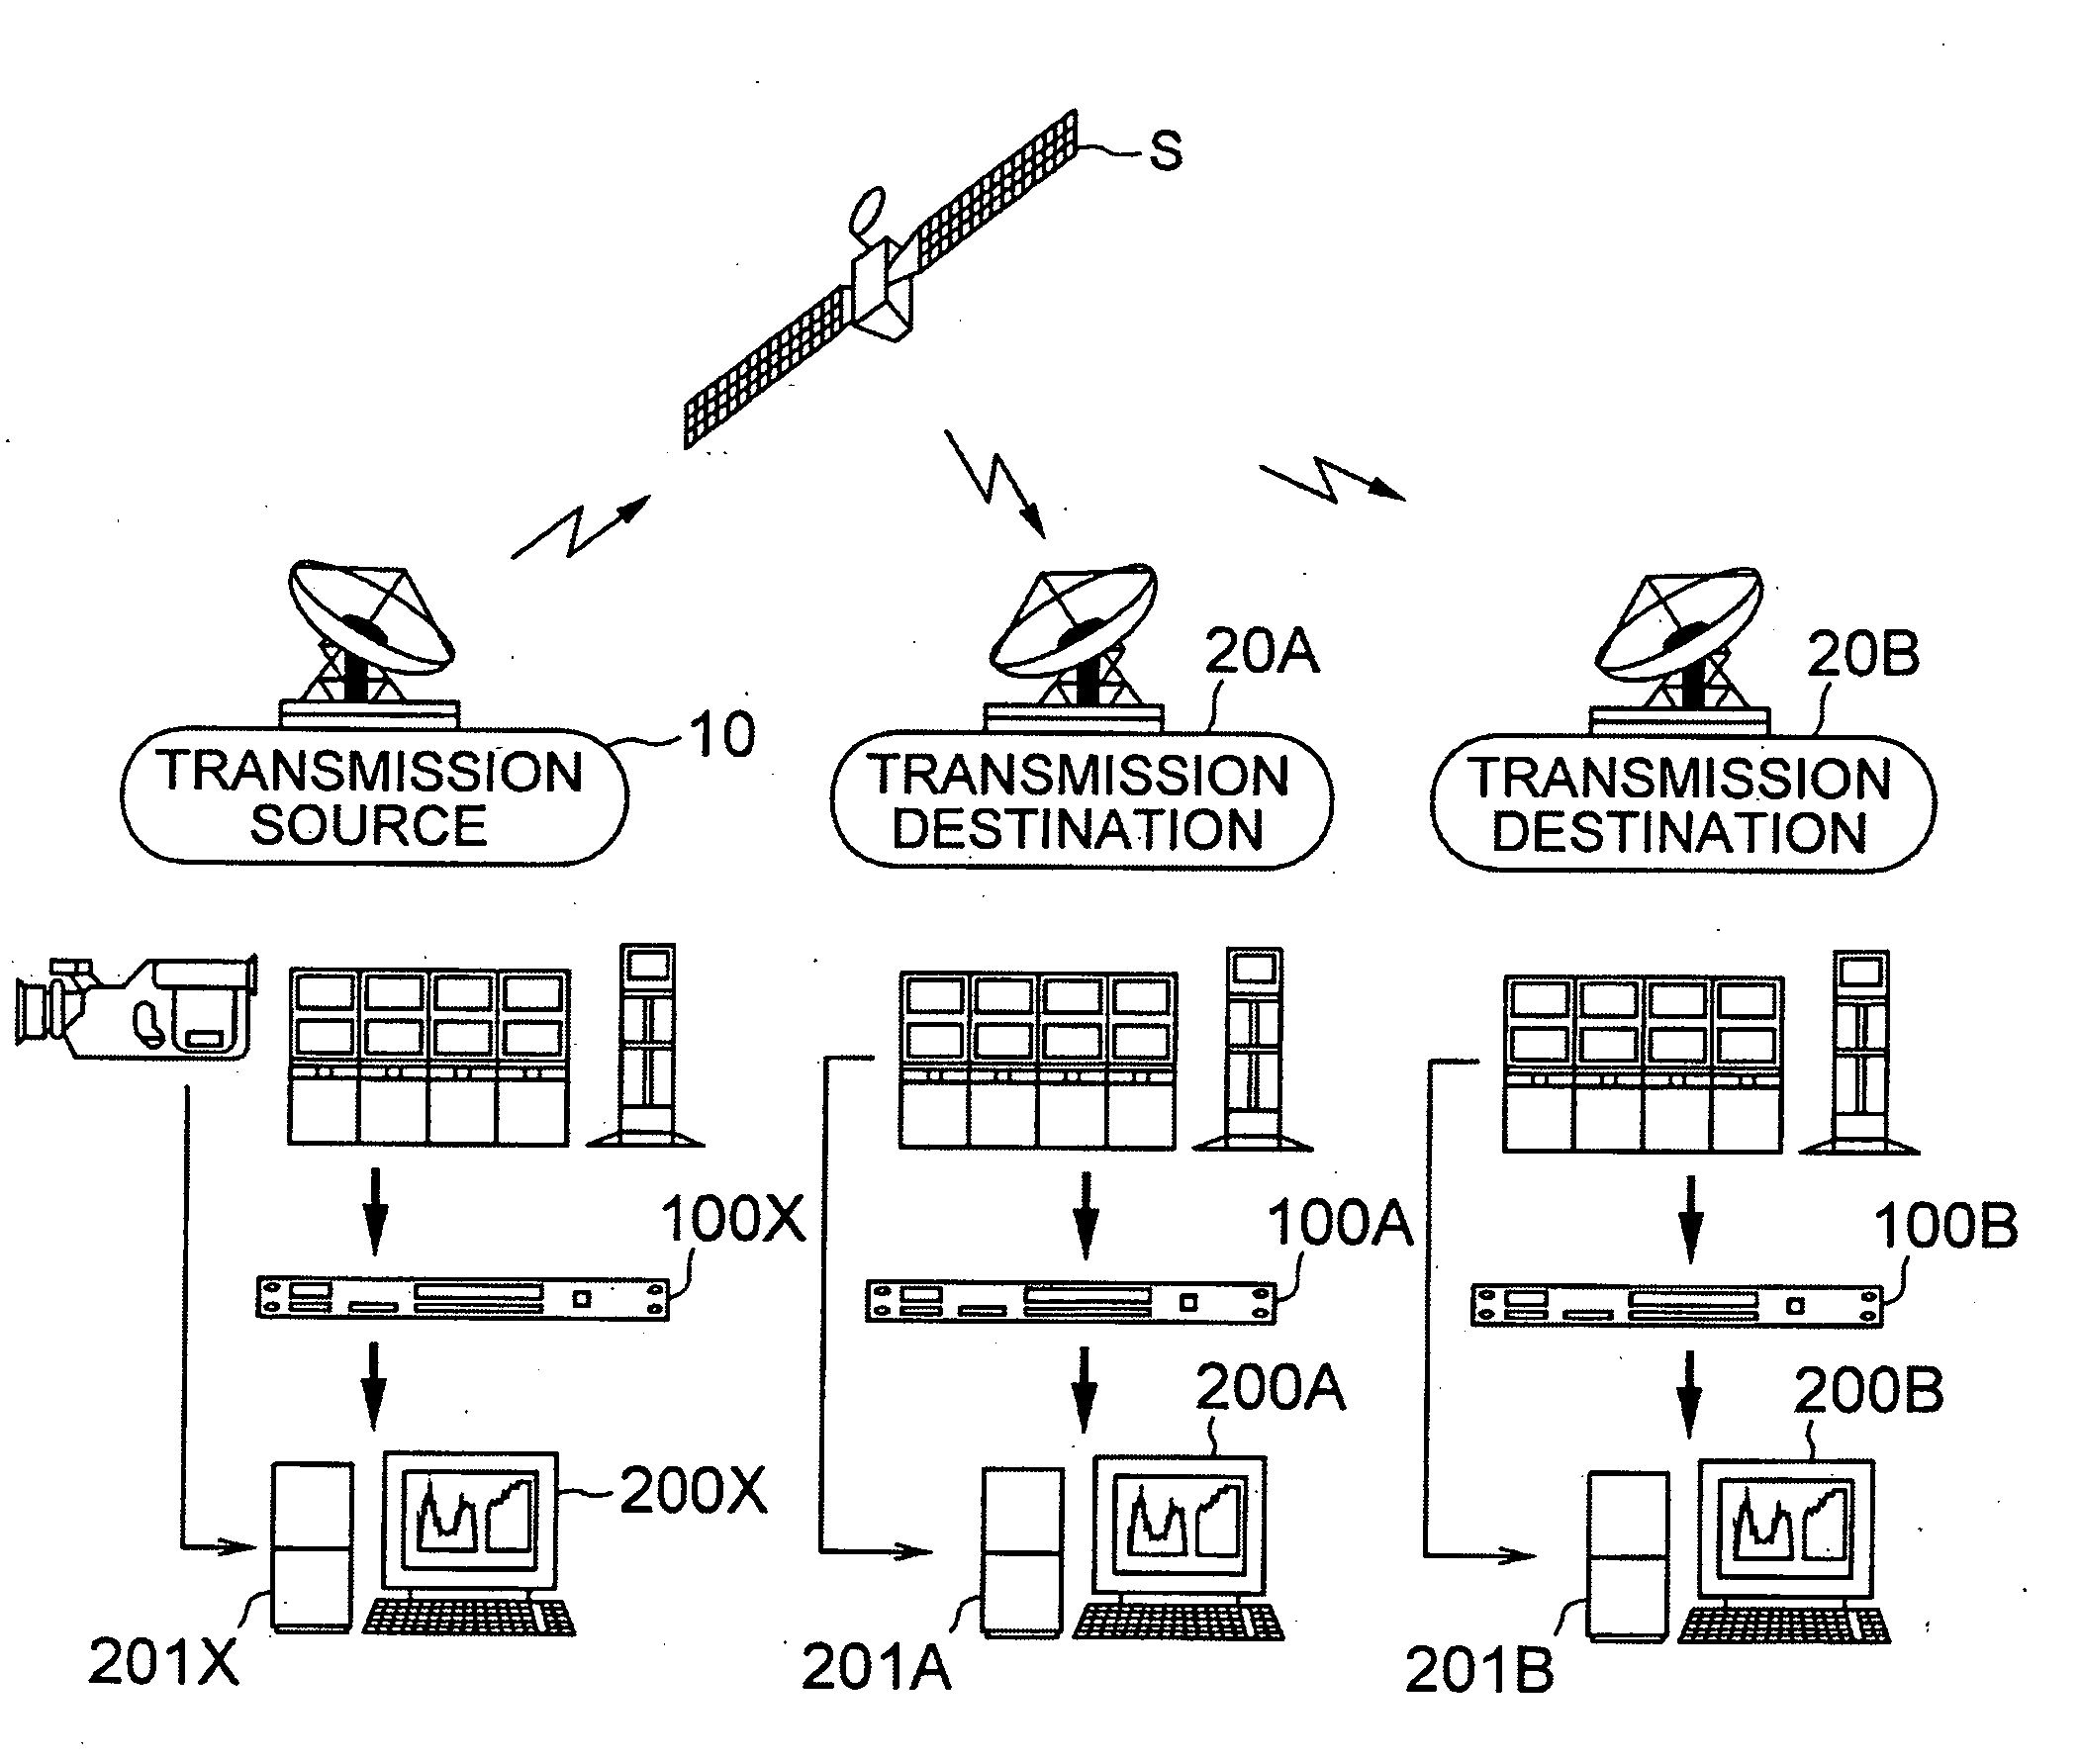 Video monitoring involving embedding a video characteristic in audio of a video/audio signal